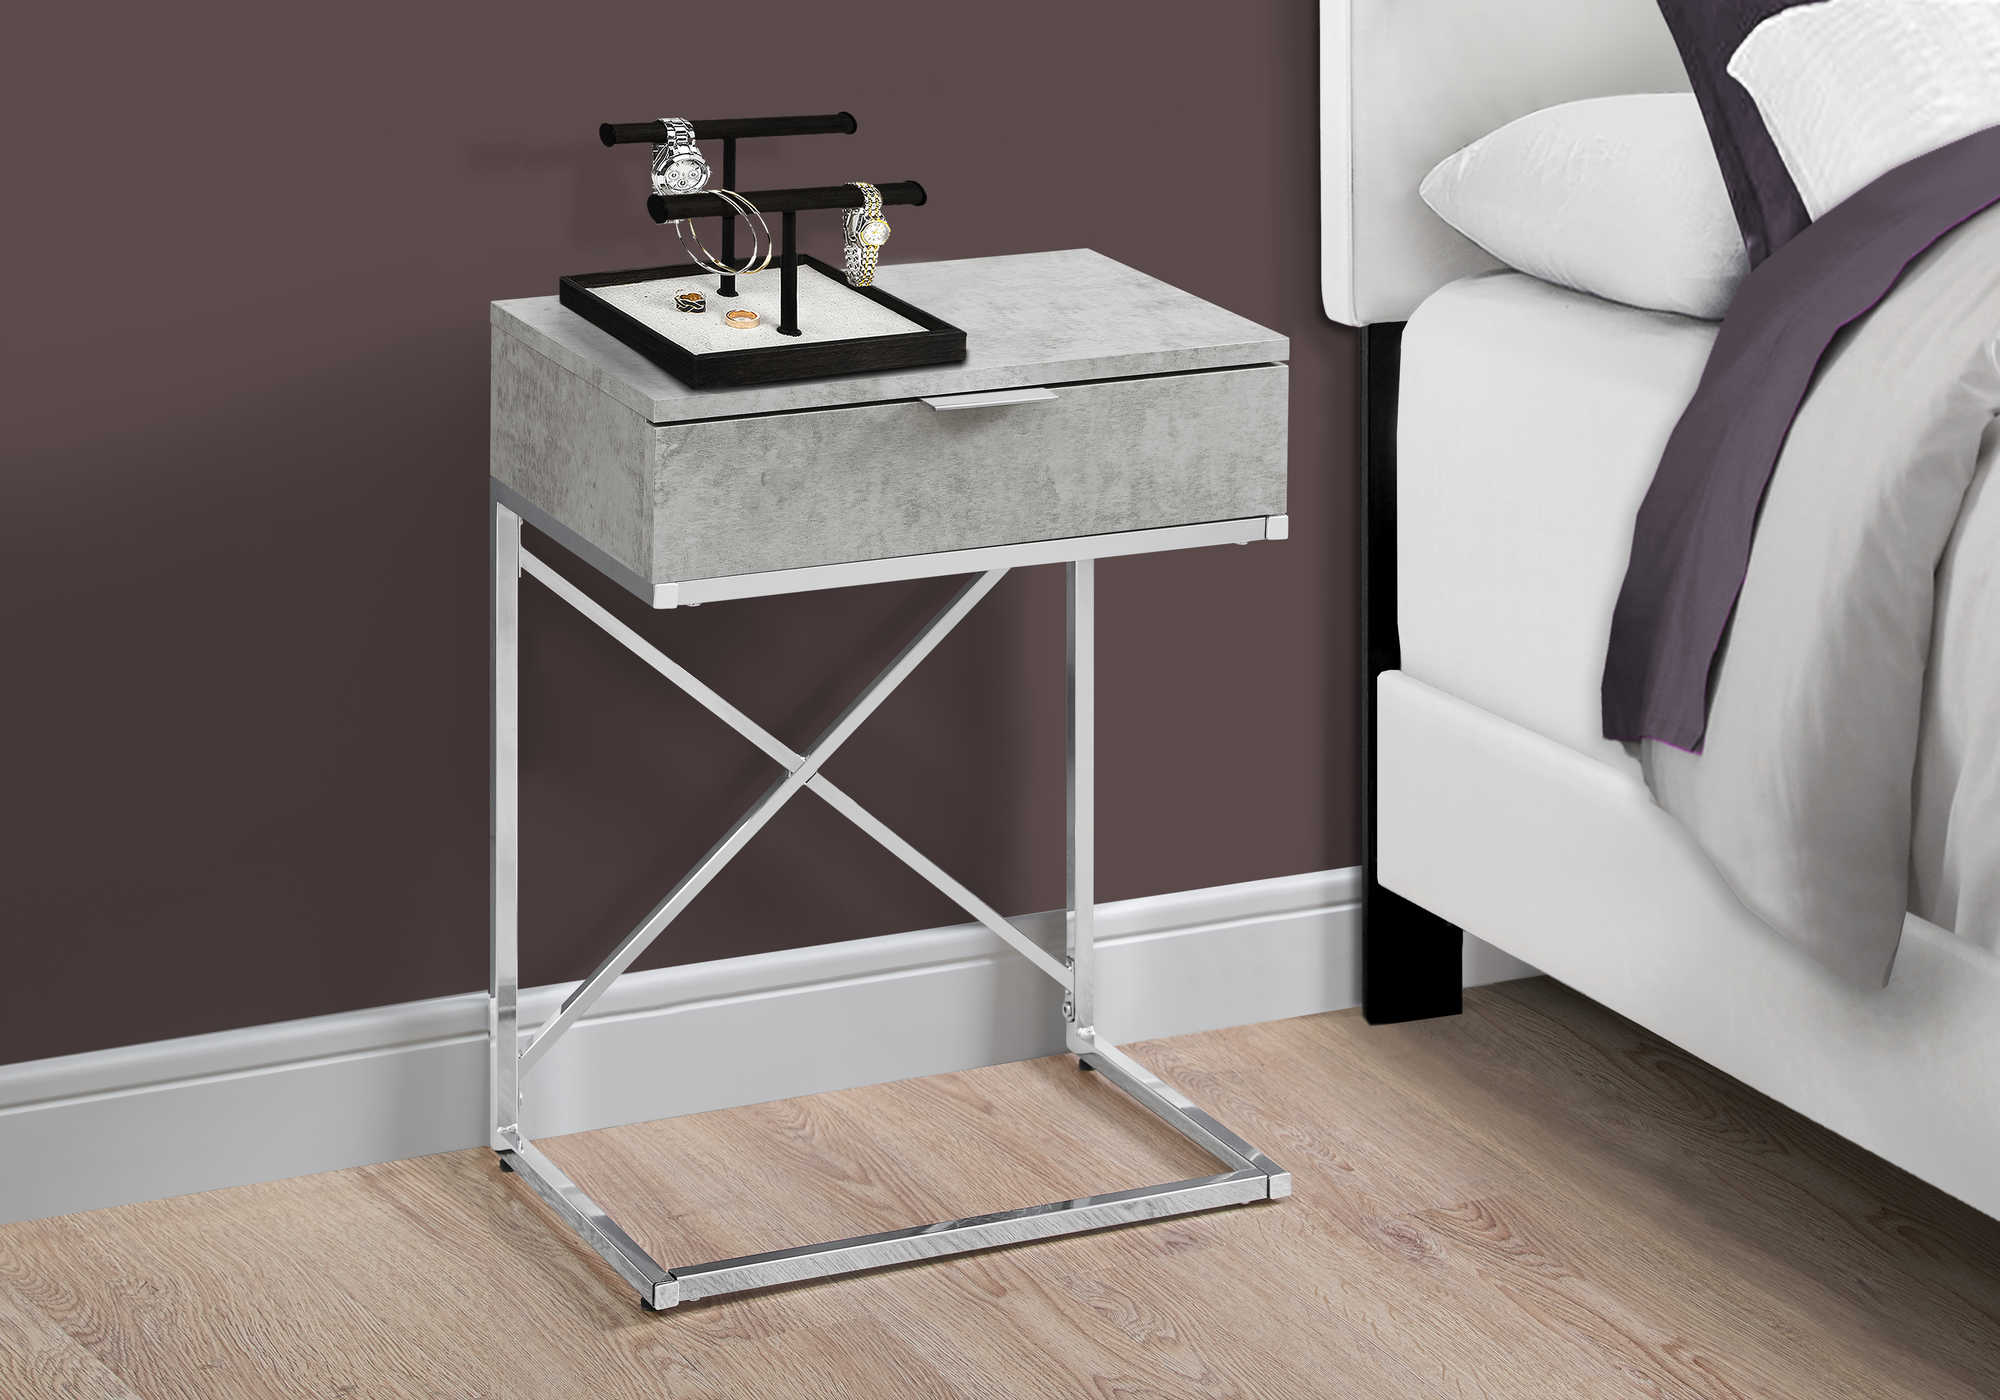 NIGHT STAND - 24"H / GREY CEMENT / CHROME METAL 